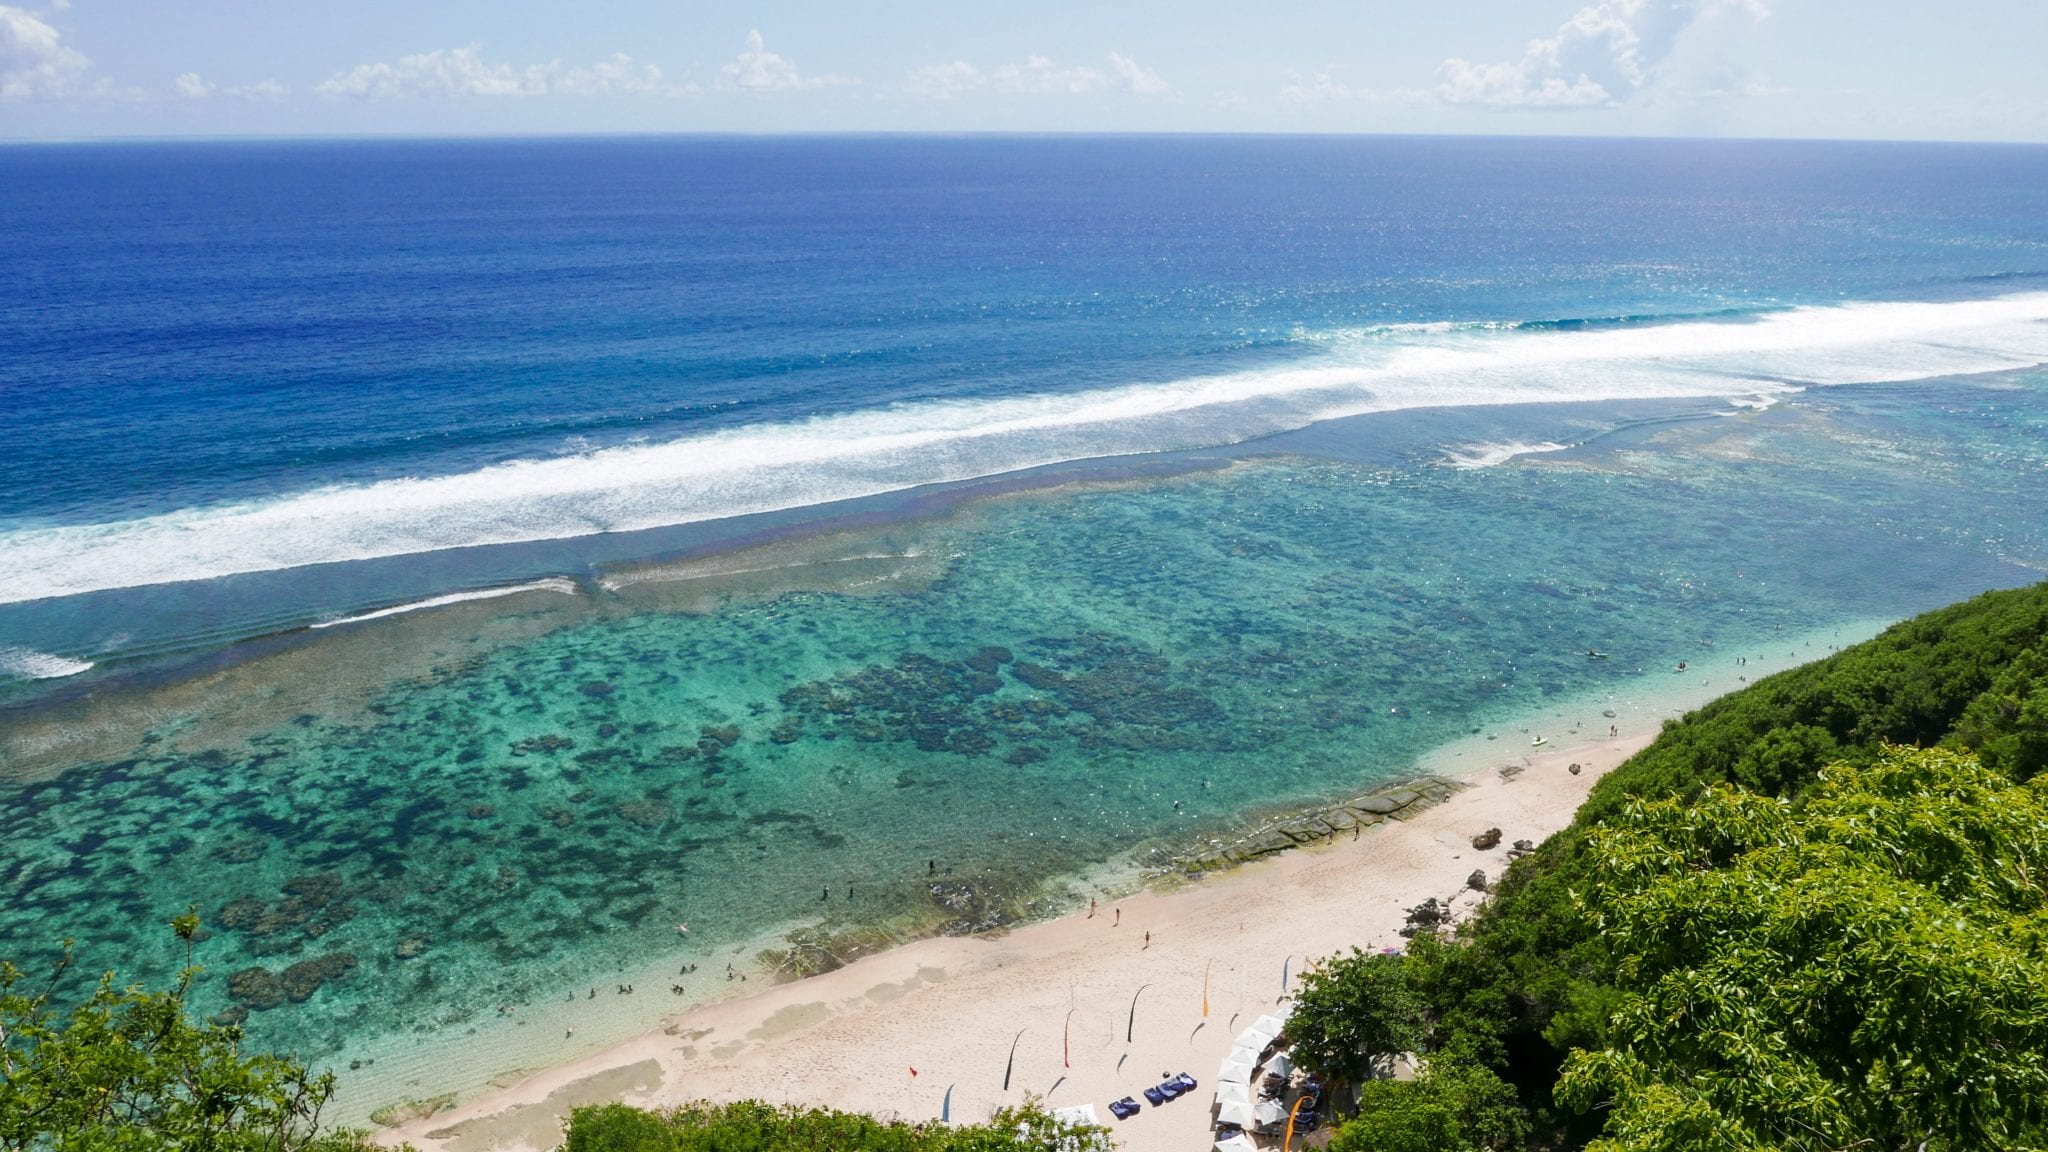 11Around Bali 27 - *DEAL GONE* Brussels to Cape Town - Business Class £1005 R/T